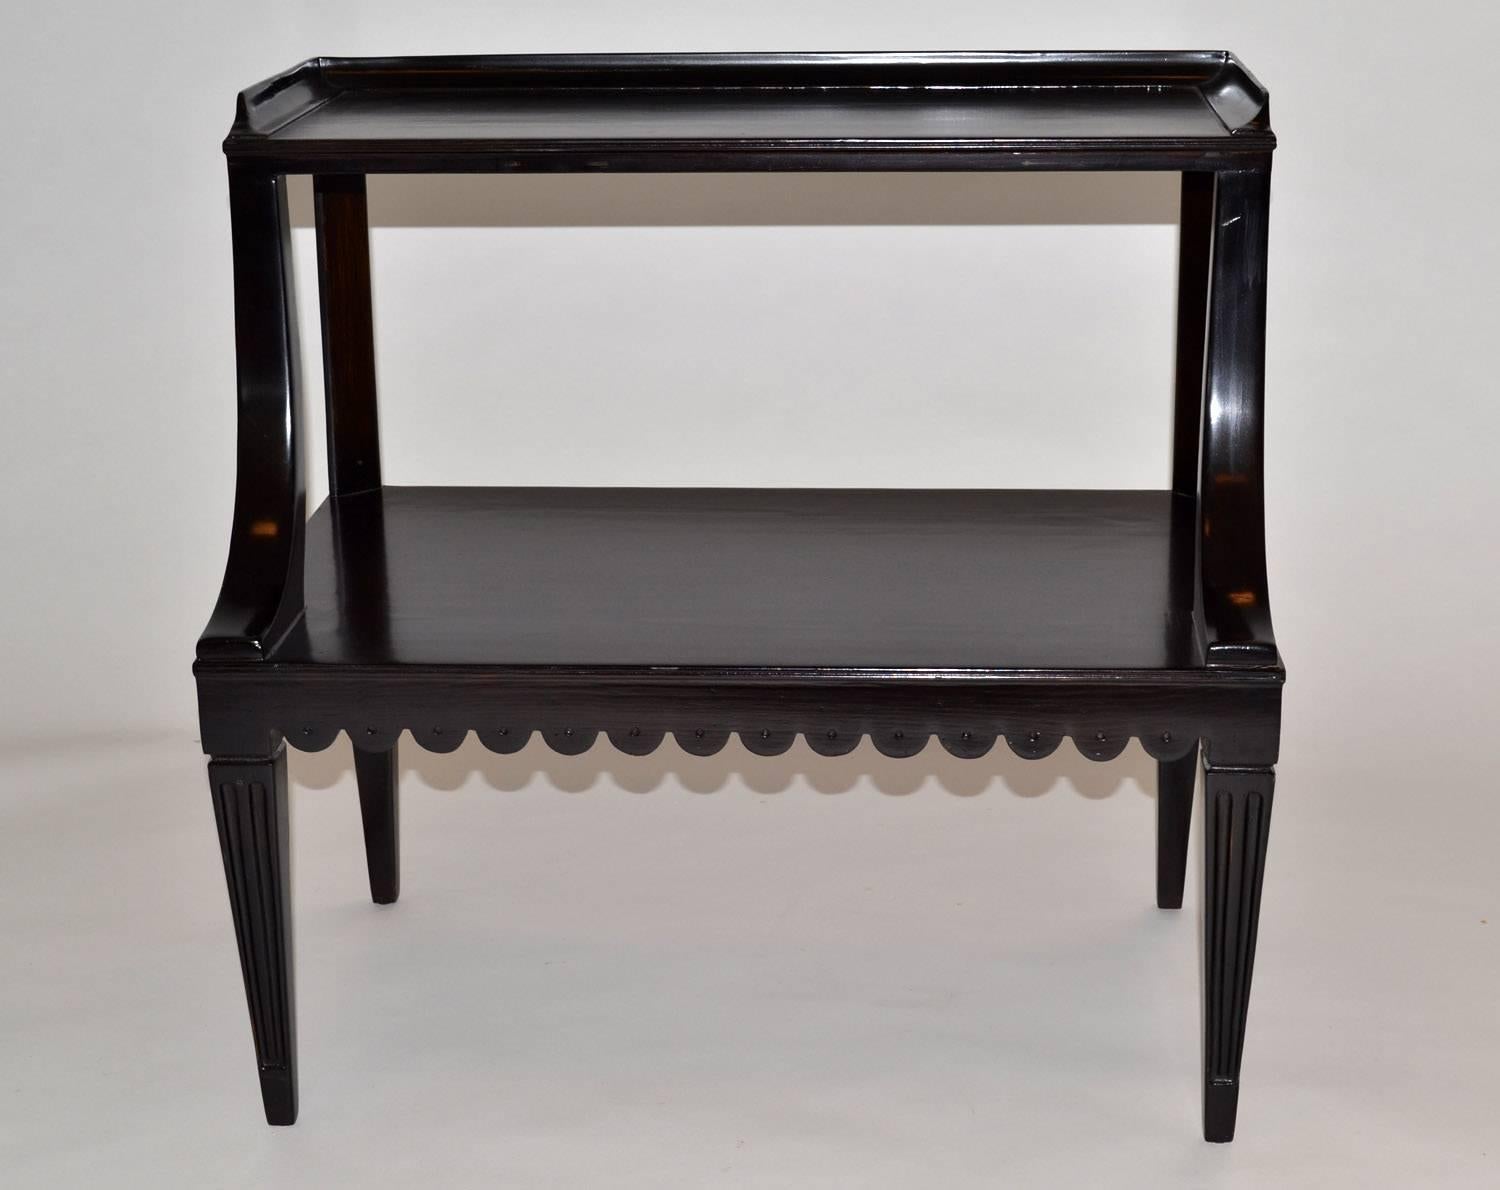 Pair of ebony side end occasional tables by Dunbar Wormley midcentury model 2275. Hard-to-find pair of ebonized mahogany two-tiered with columnar legs and a scalloped lower edge. Brass Dunbar tag and paper shipping tags intact. Professionally